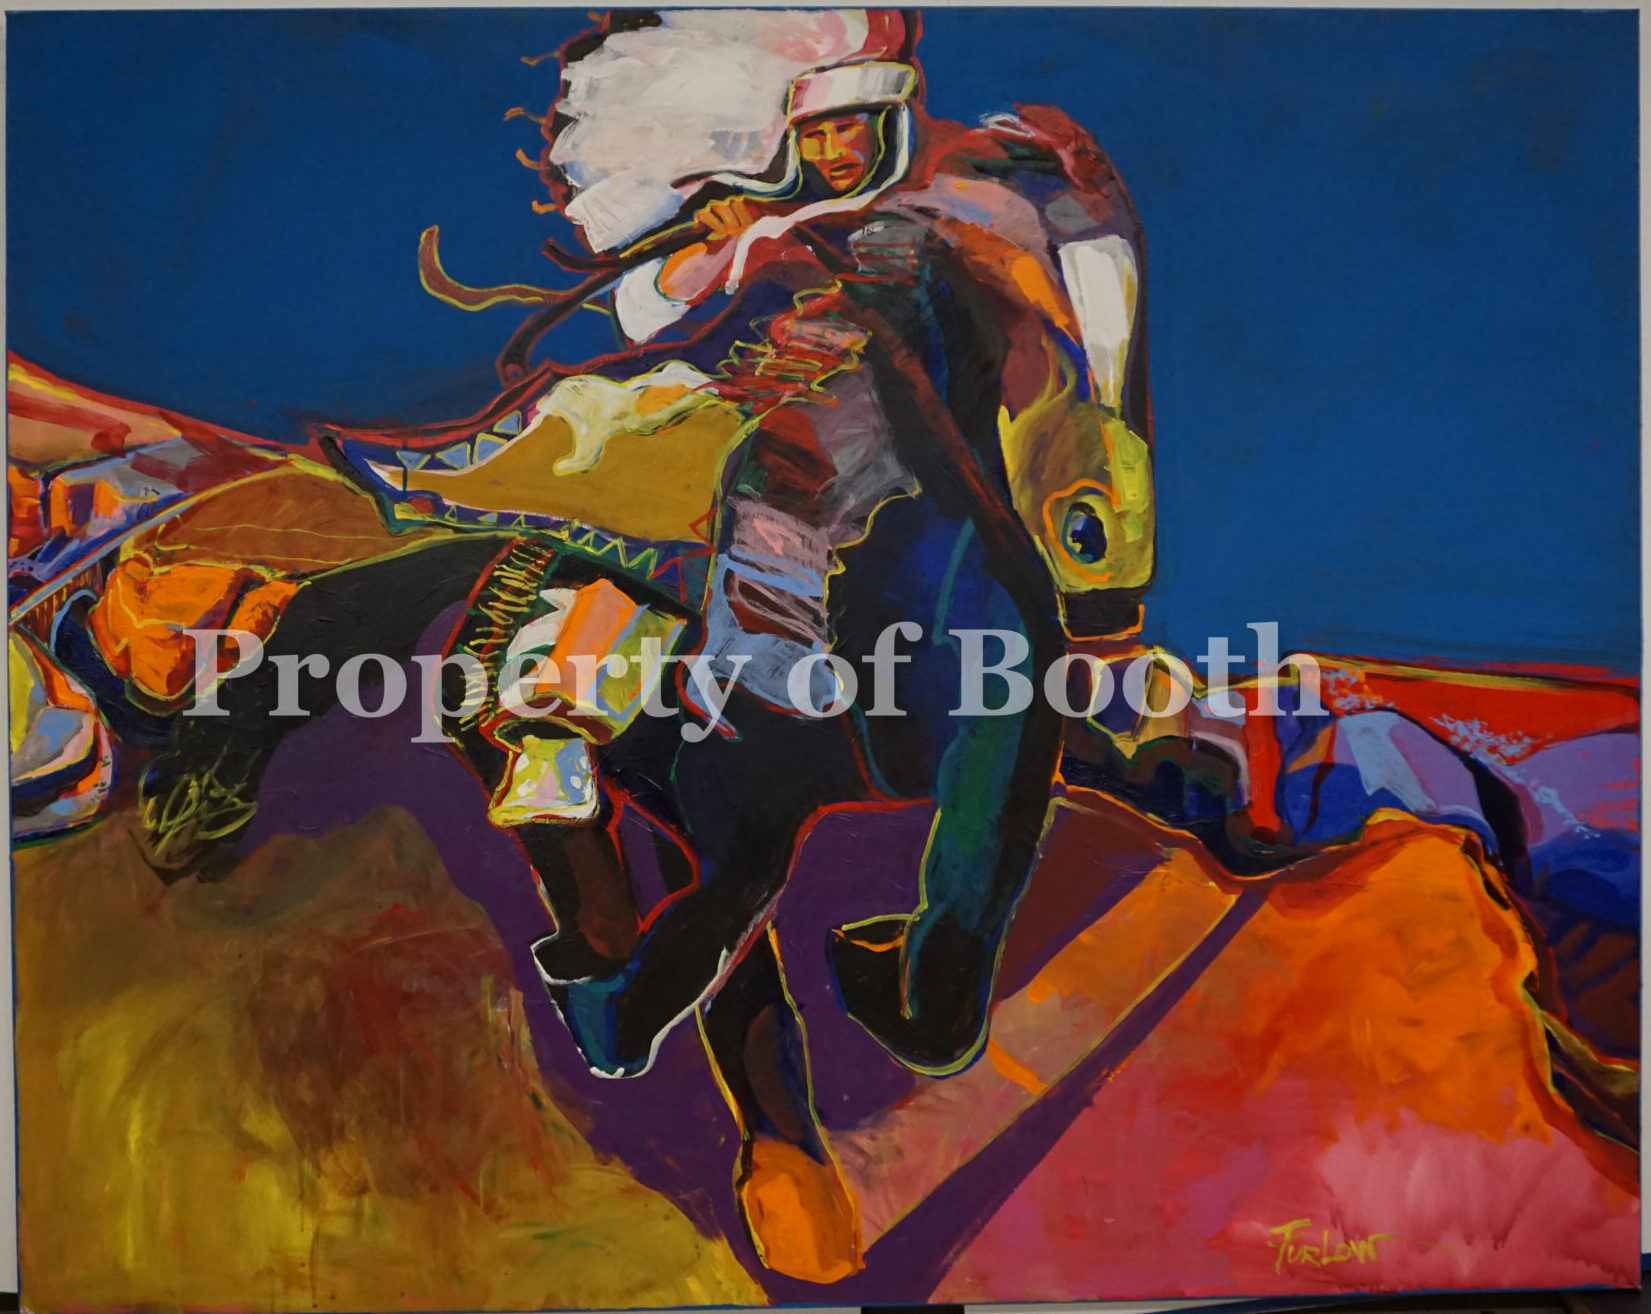 © Malcolm Furlow, Galloping Chief at the Gorge, n.d., acrylic on canvas, 46 x 58", Gift of Mary Carole Cooney and Henry Bauer